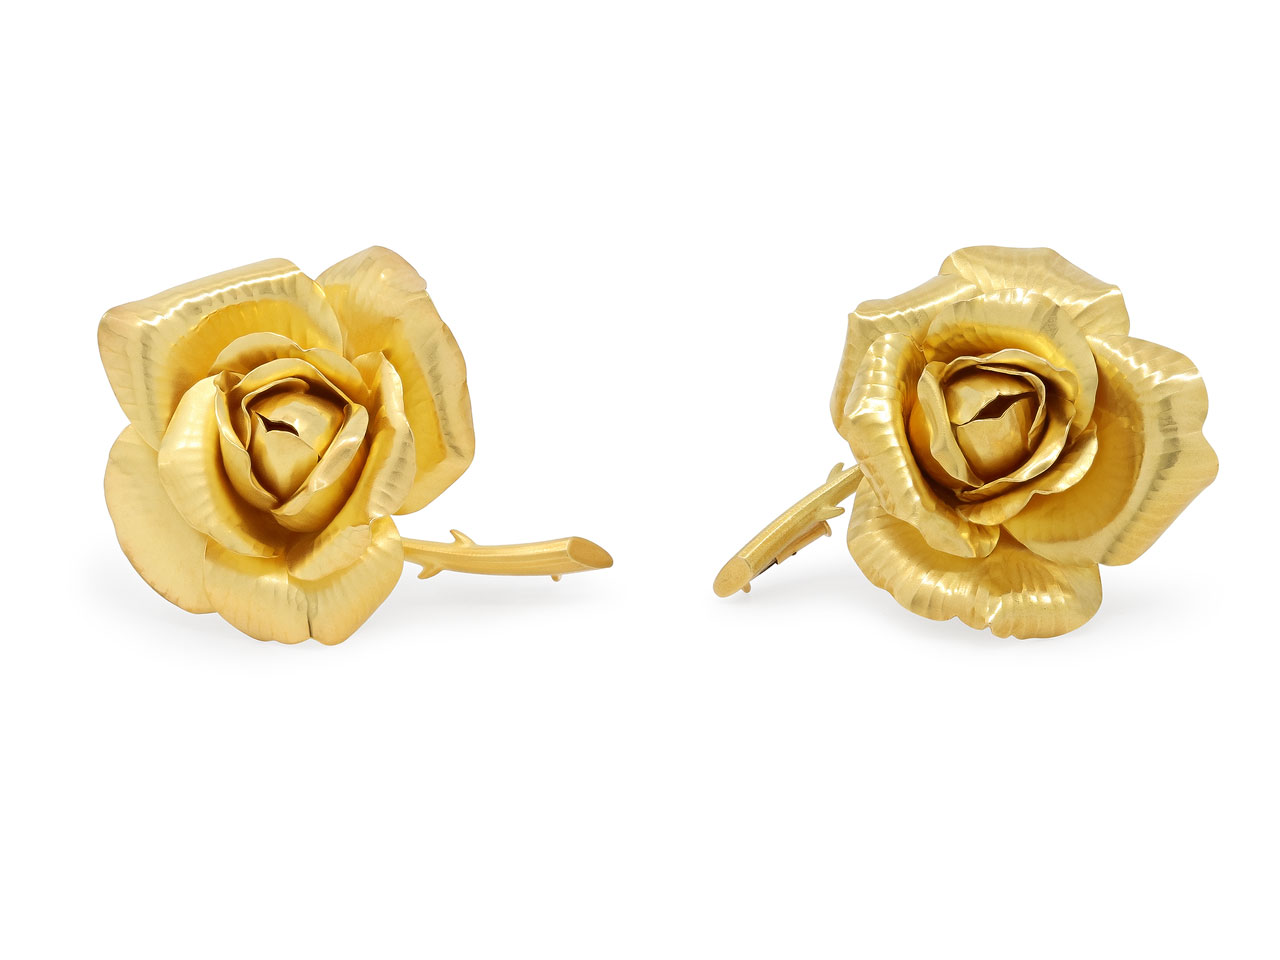 Pair of Hermès Rose Brooches in 18K Gold